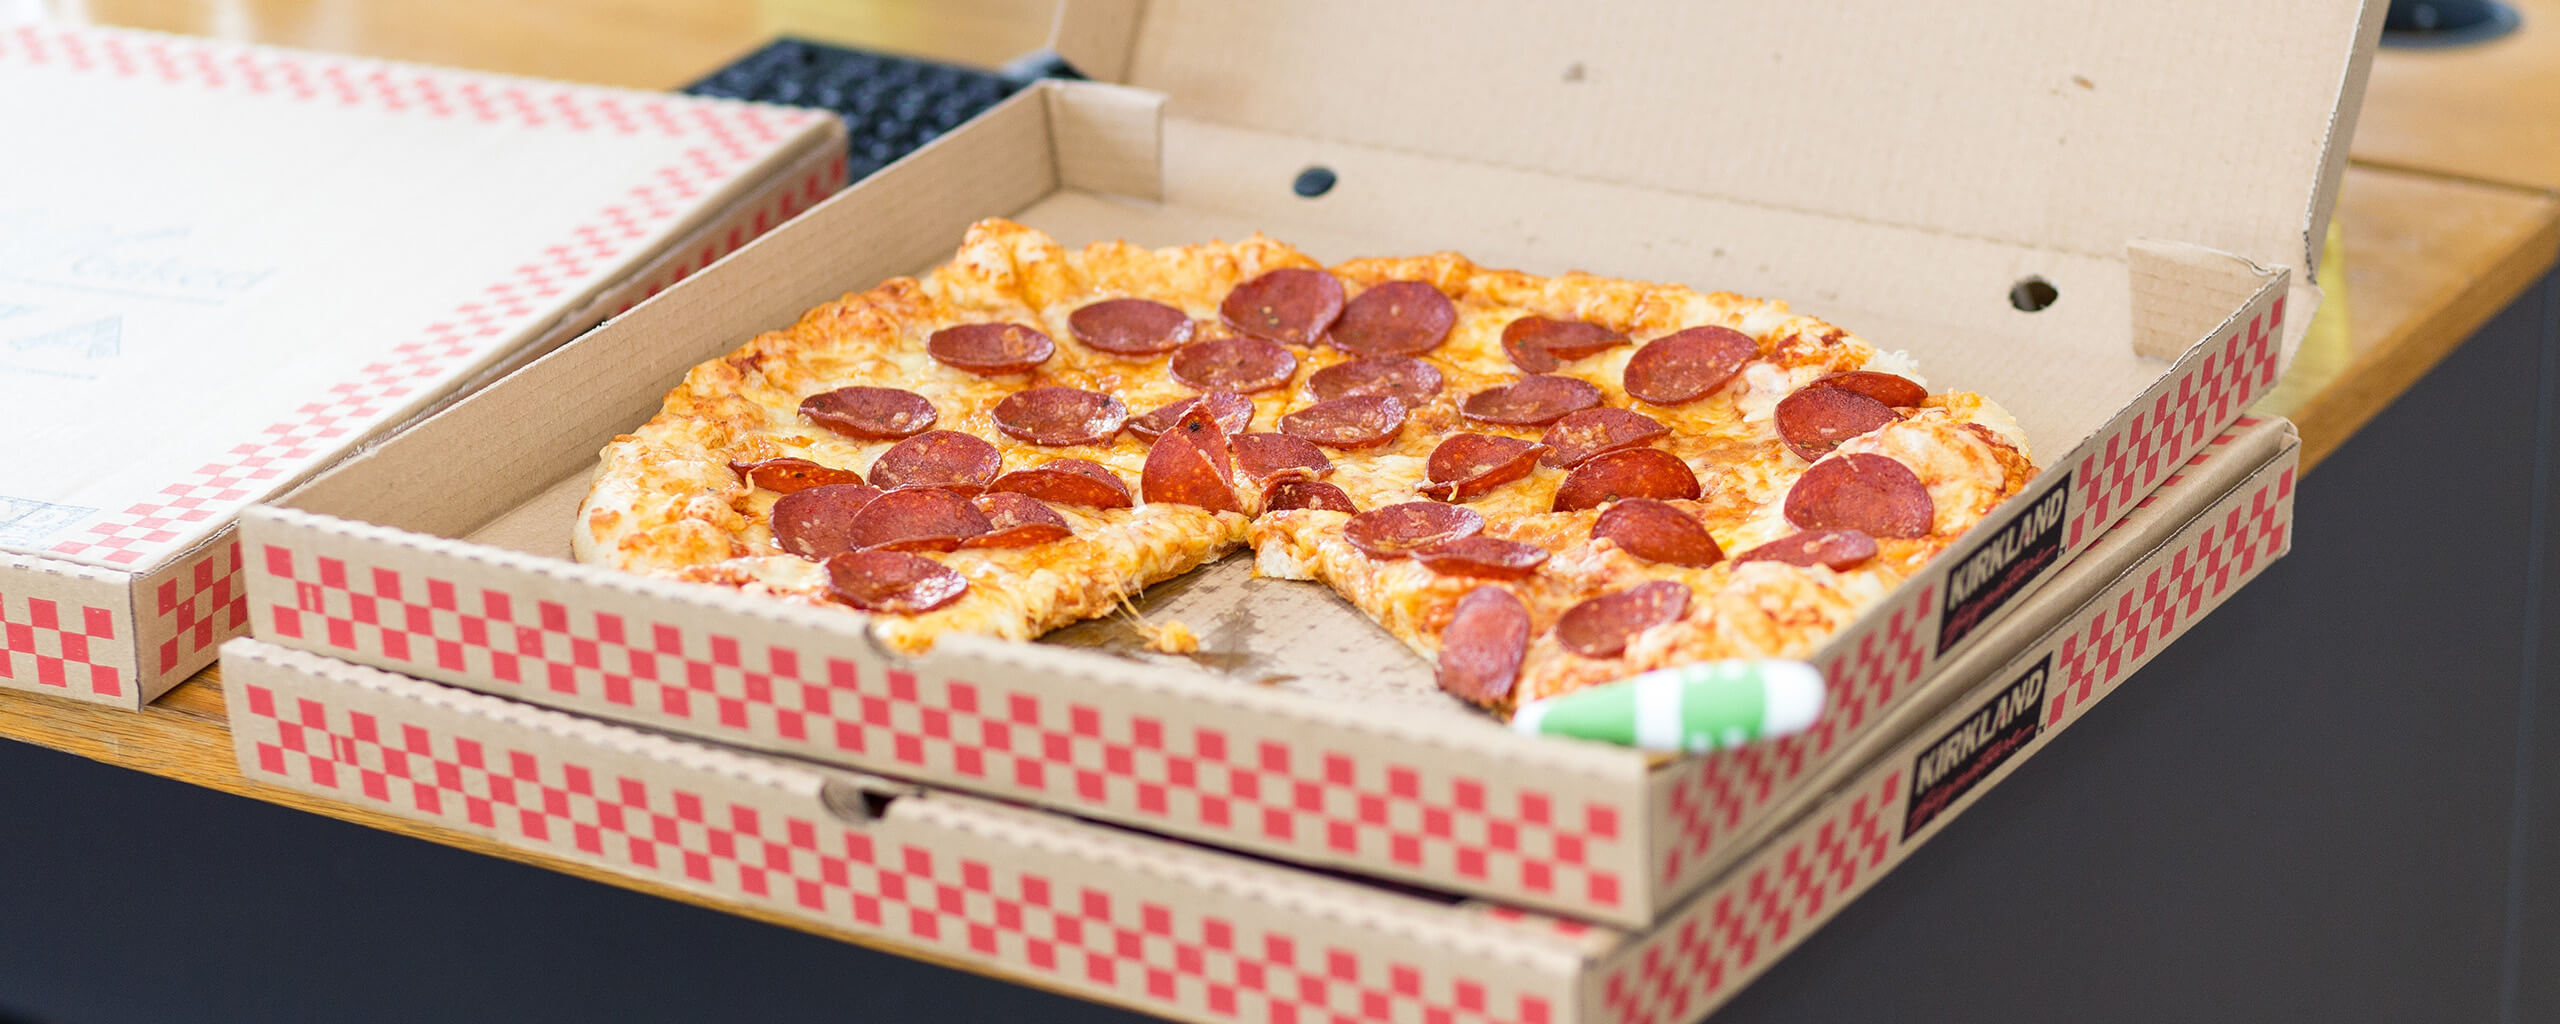 pepperoni pizza in a box